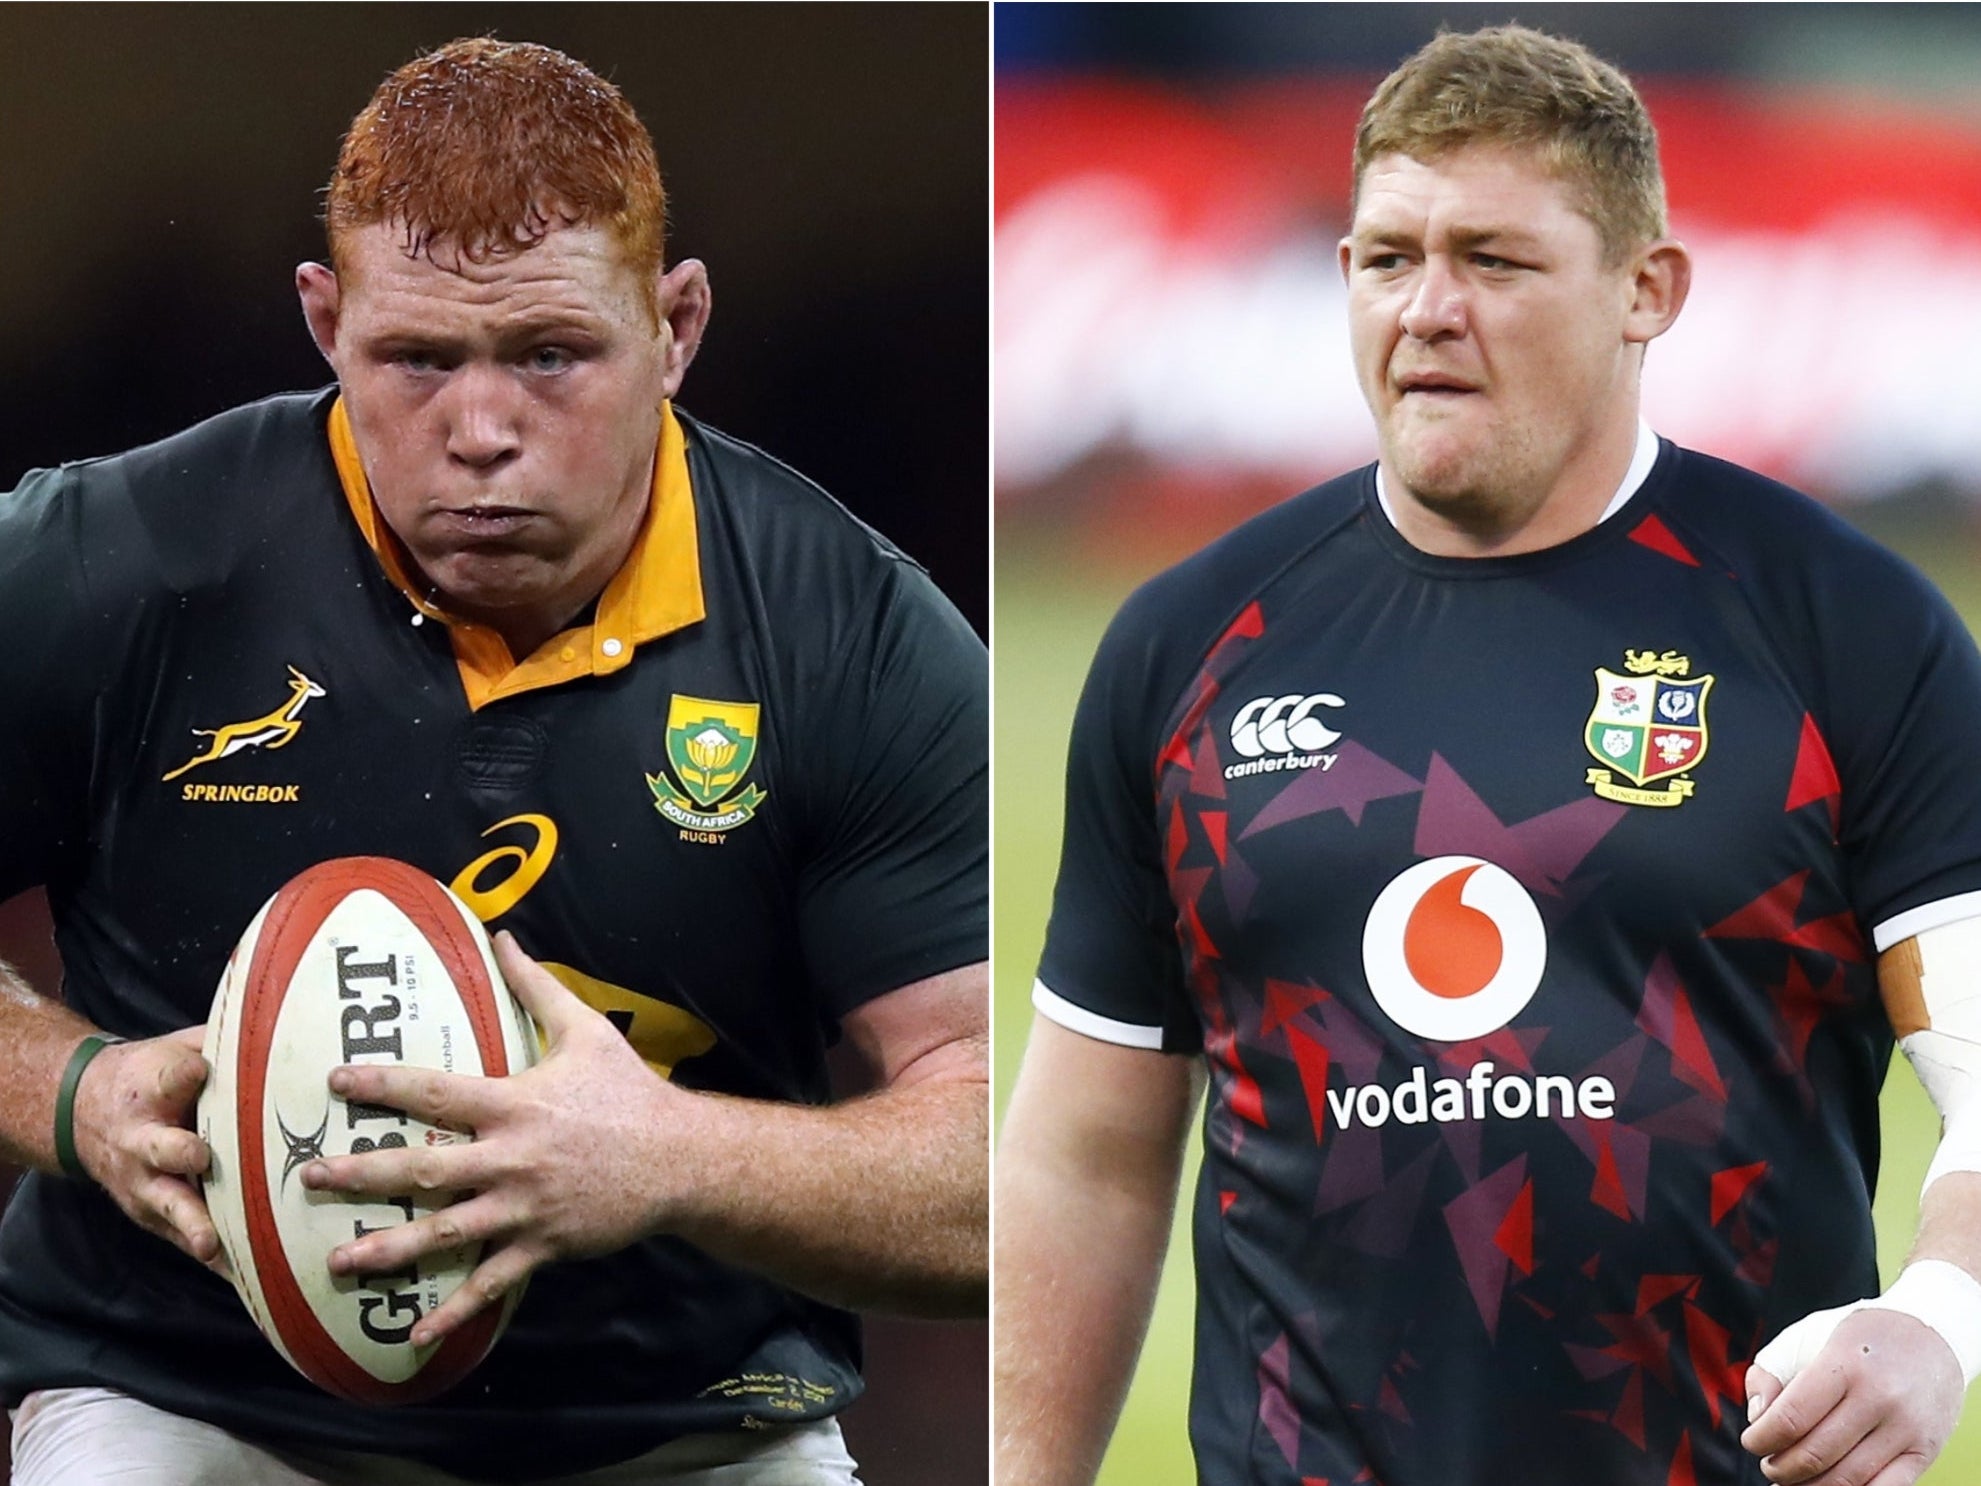 Steven Kitshoff (left) and Tadhg Furlong will go head to head this weekend (Andrew Matthews/Steve Haag/PA)